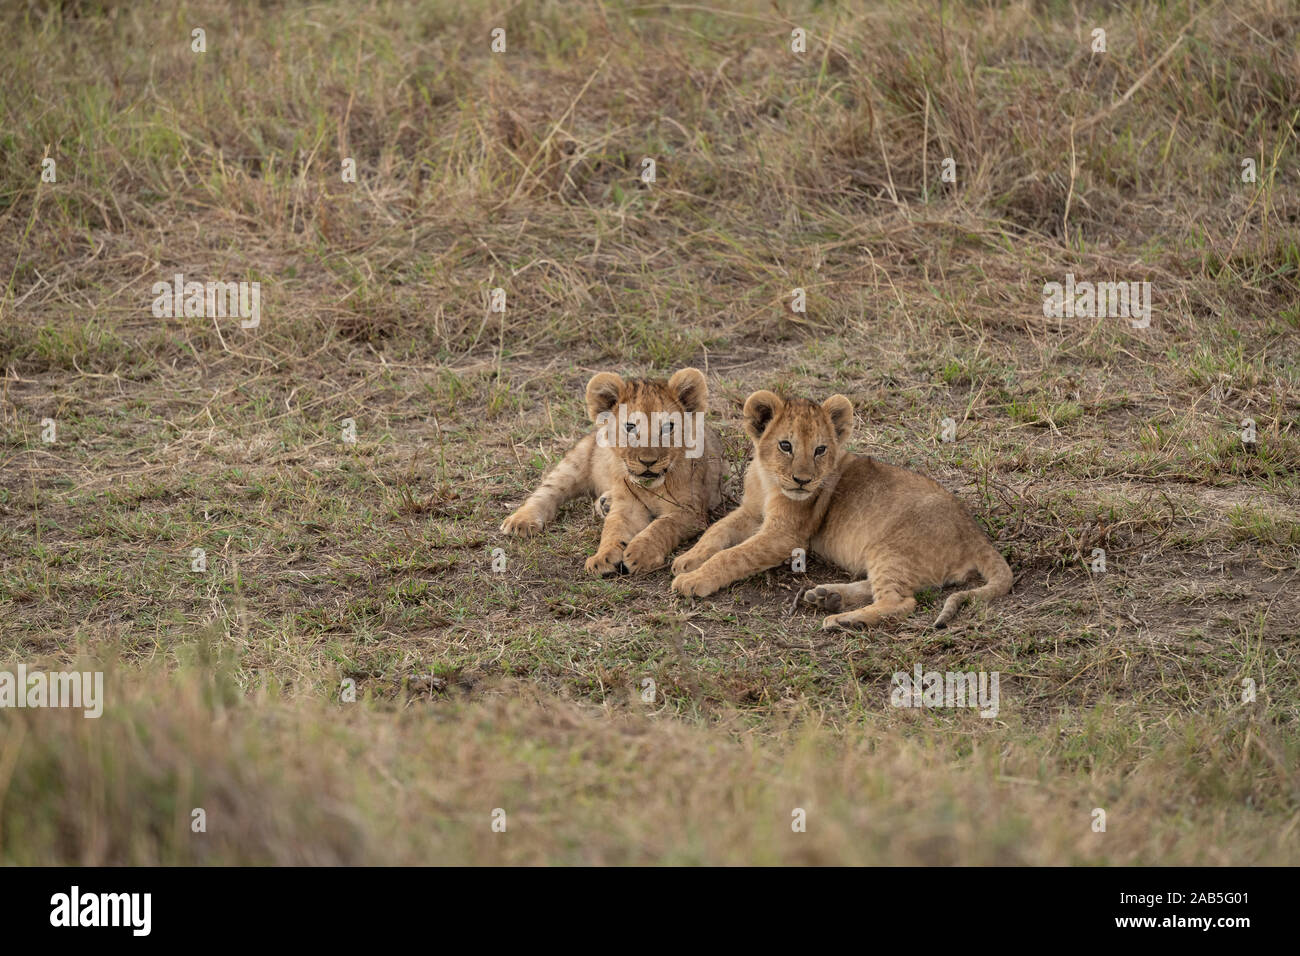 Two young lion cubs (Panthera leo) lying on grass in a gully in the Masai Mara in Kenya Stock Photo